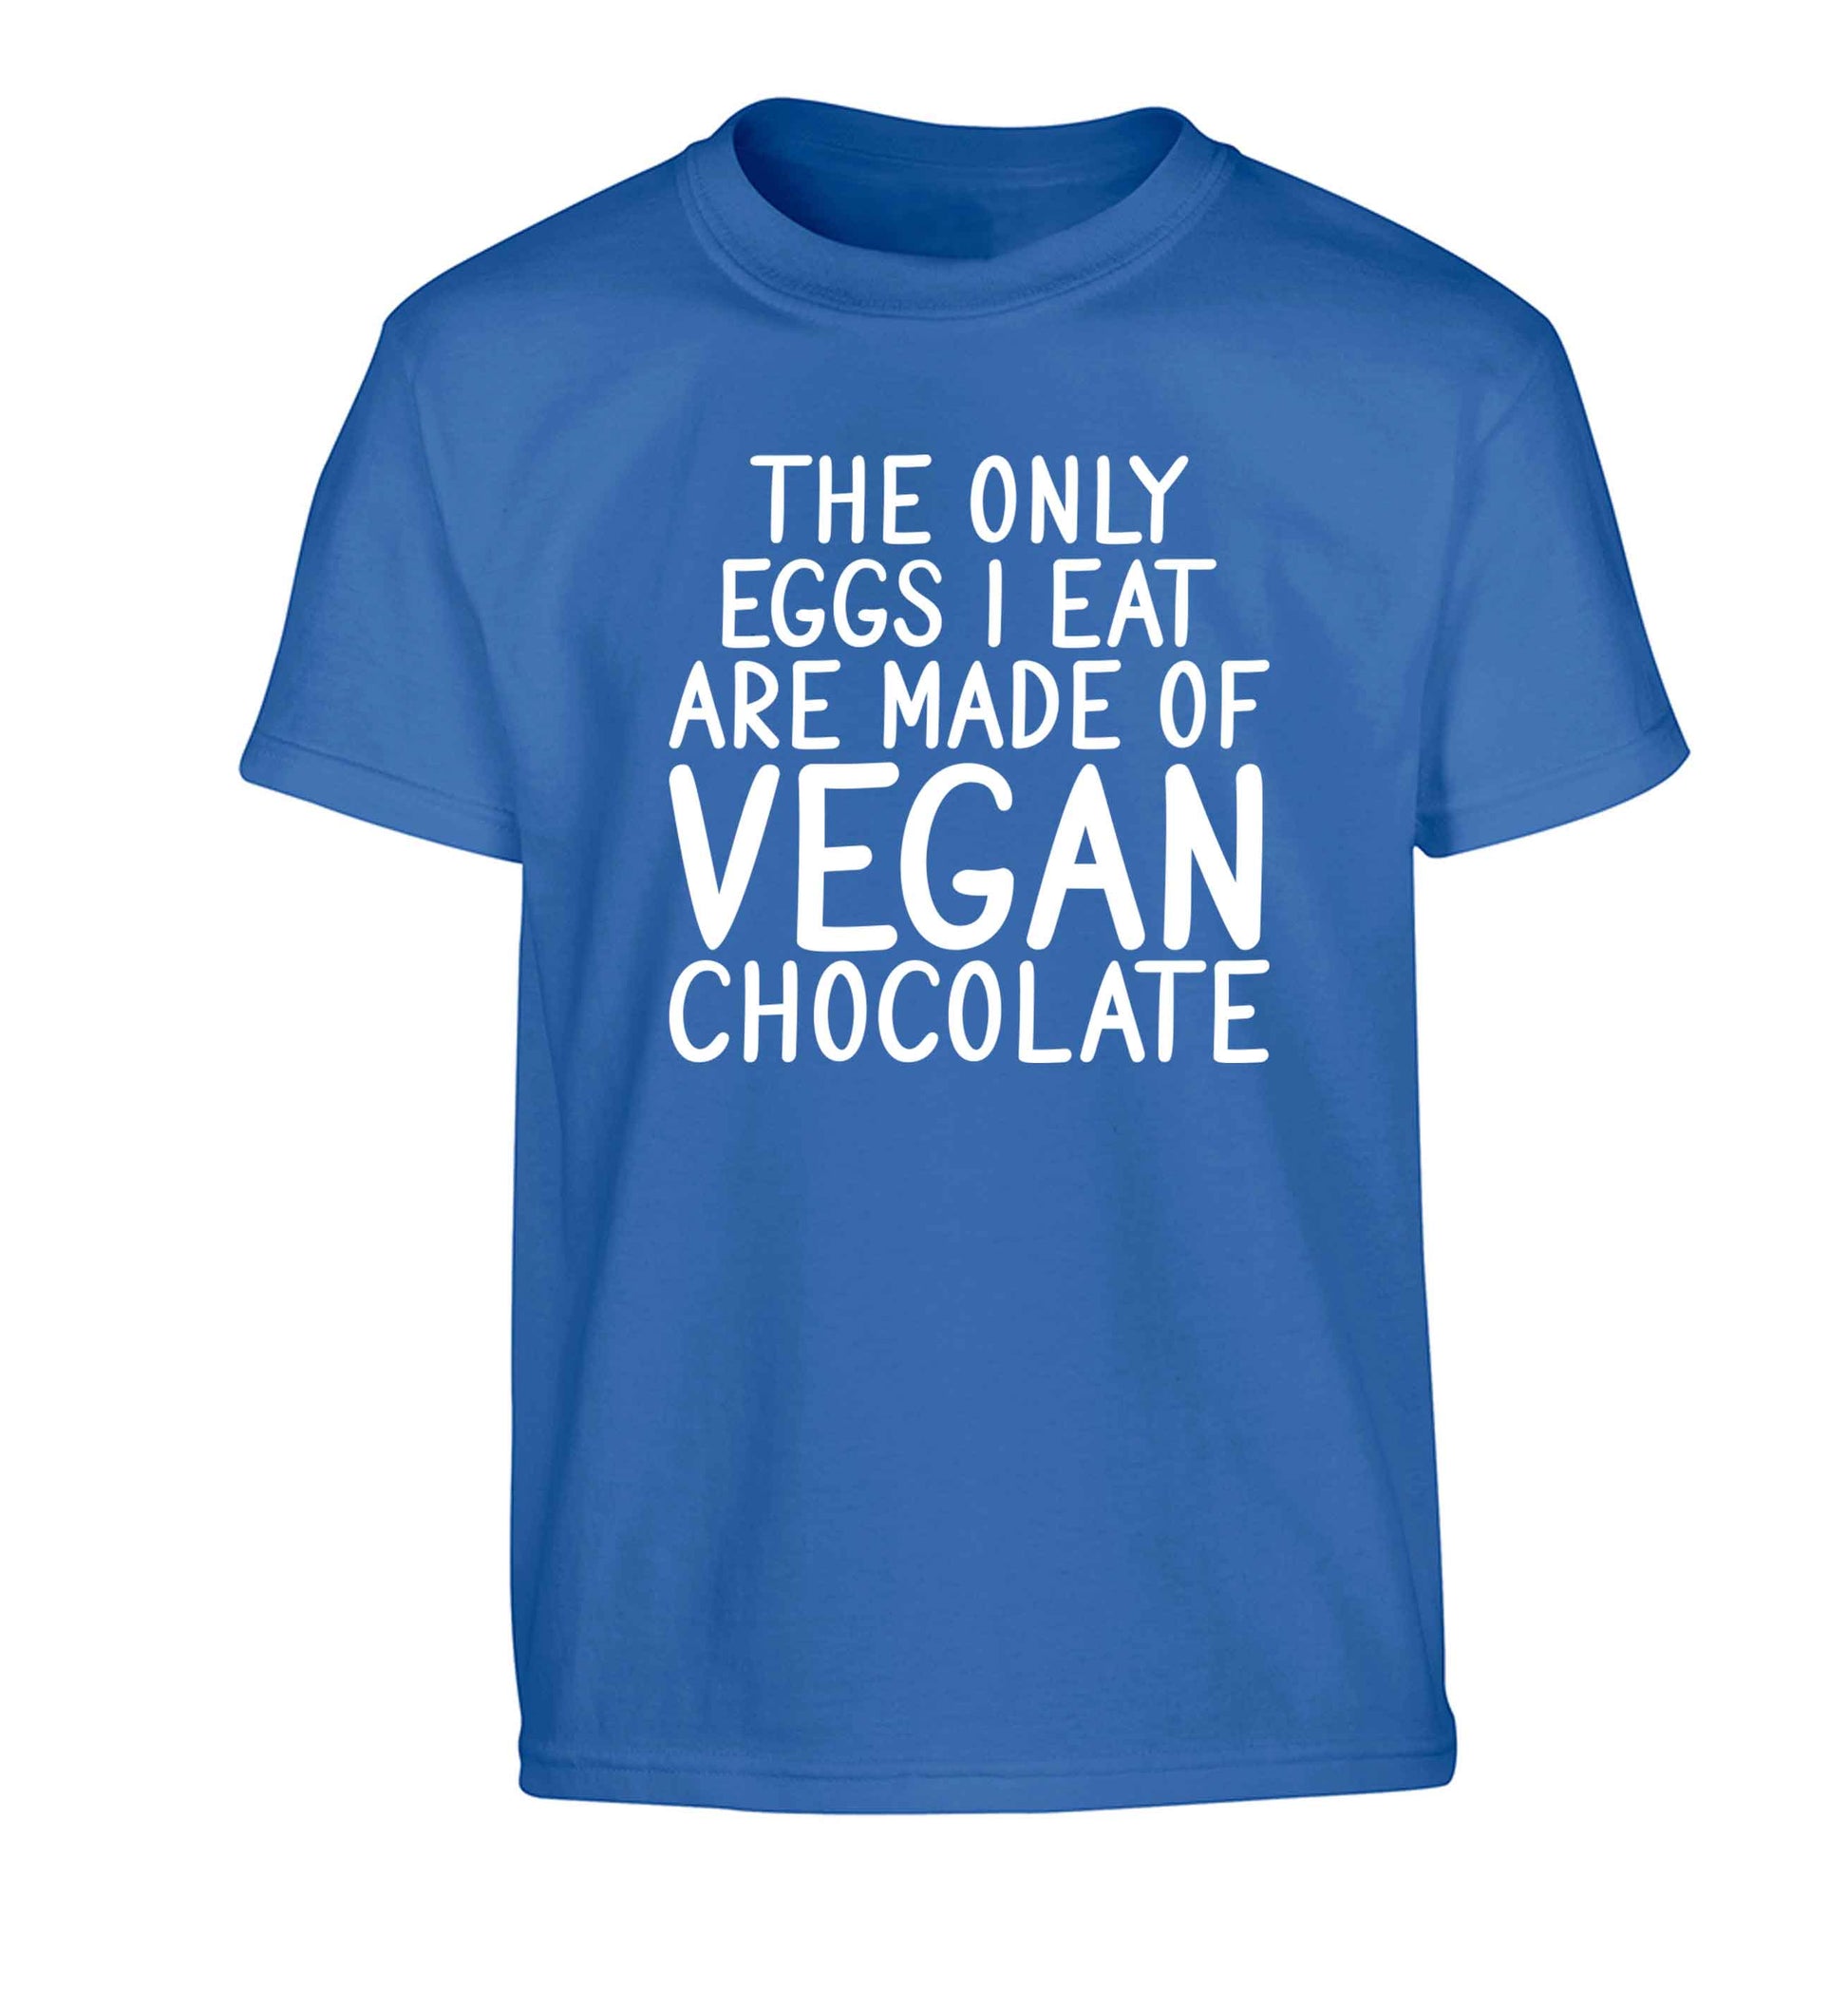 The only eggs I eat are made of vegan chocolate Children's blue Tshirt 12-13 Years